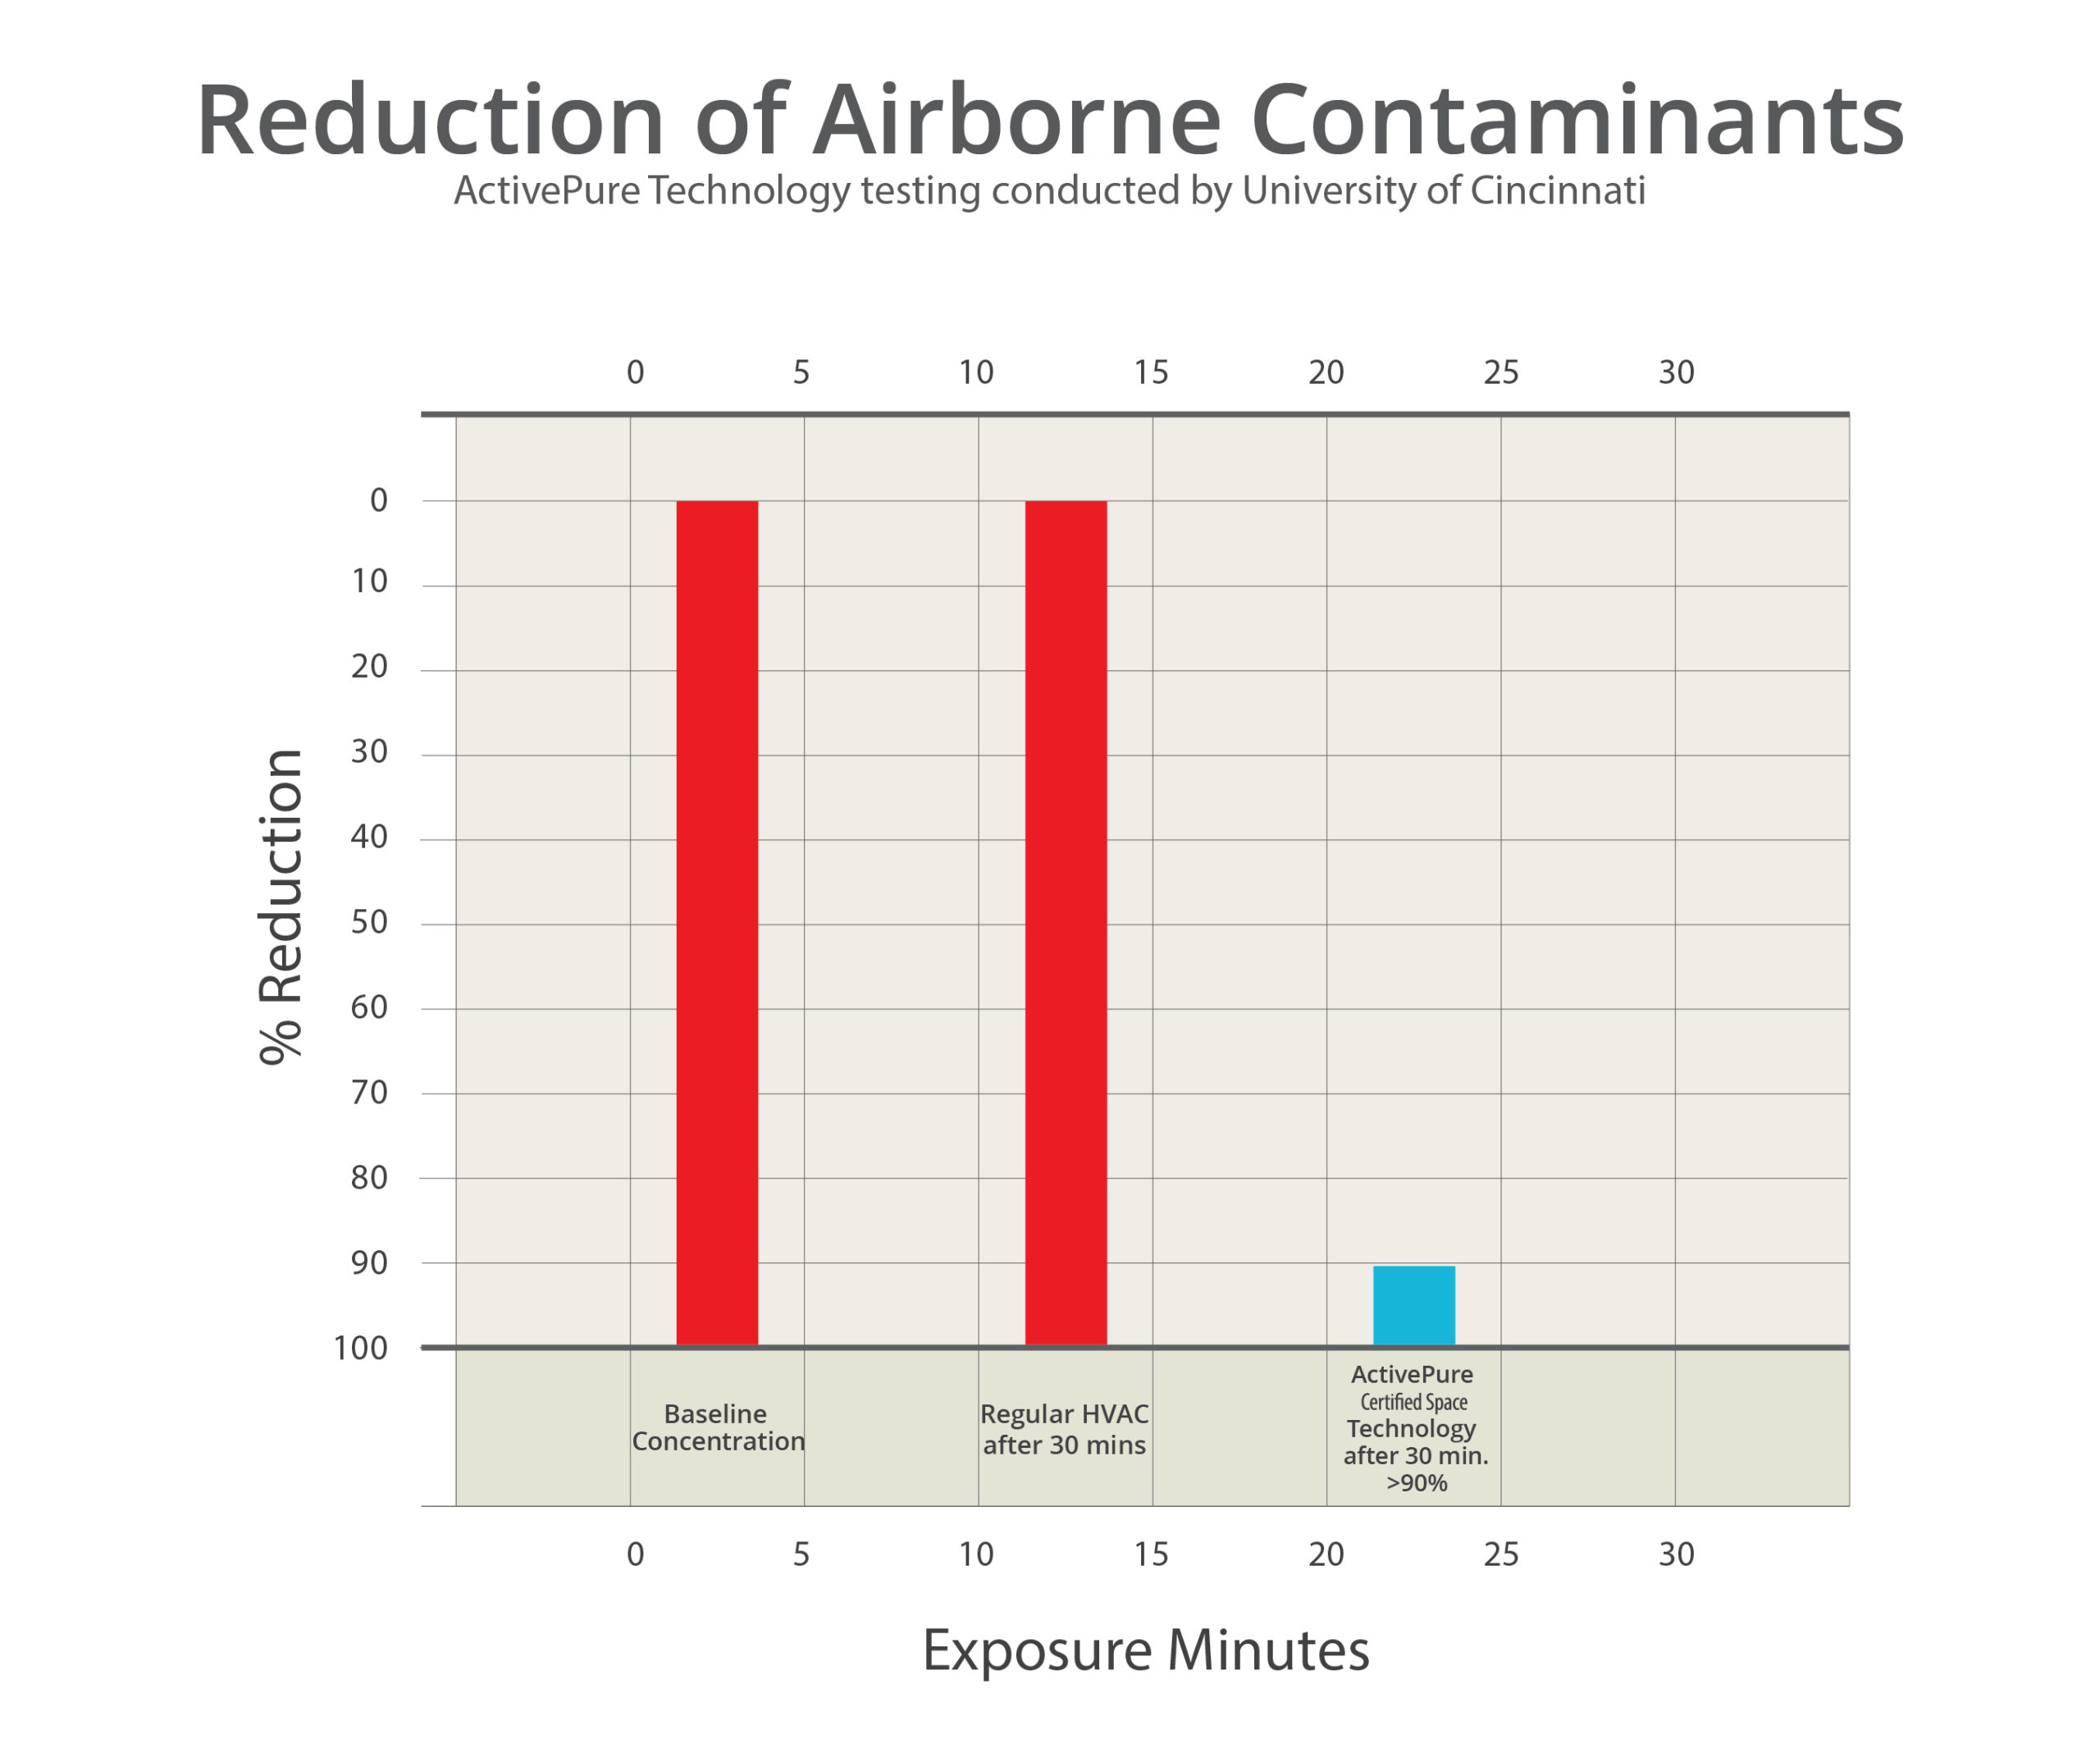 A graph showing that ActivePure® technology reduces airborne contaminants